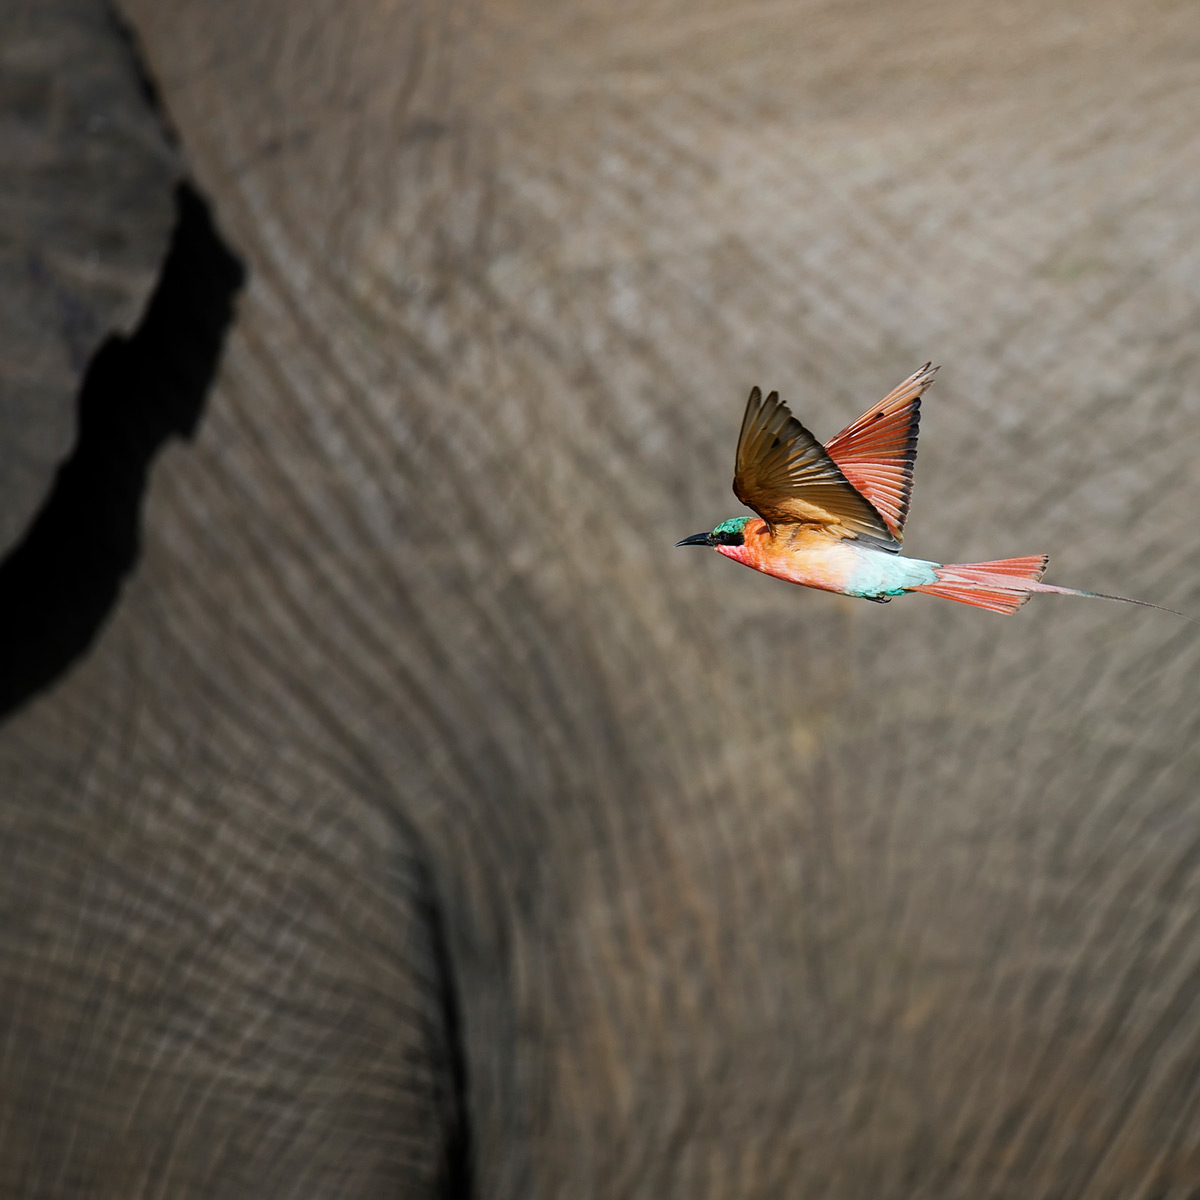 A carmine bee-eater flies around an elephant in Kruger National Park, South Africa © Licinia Machado